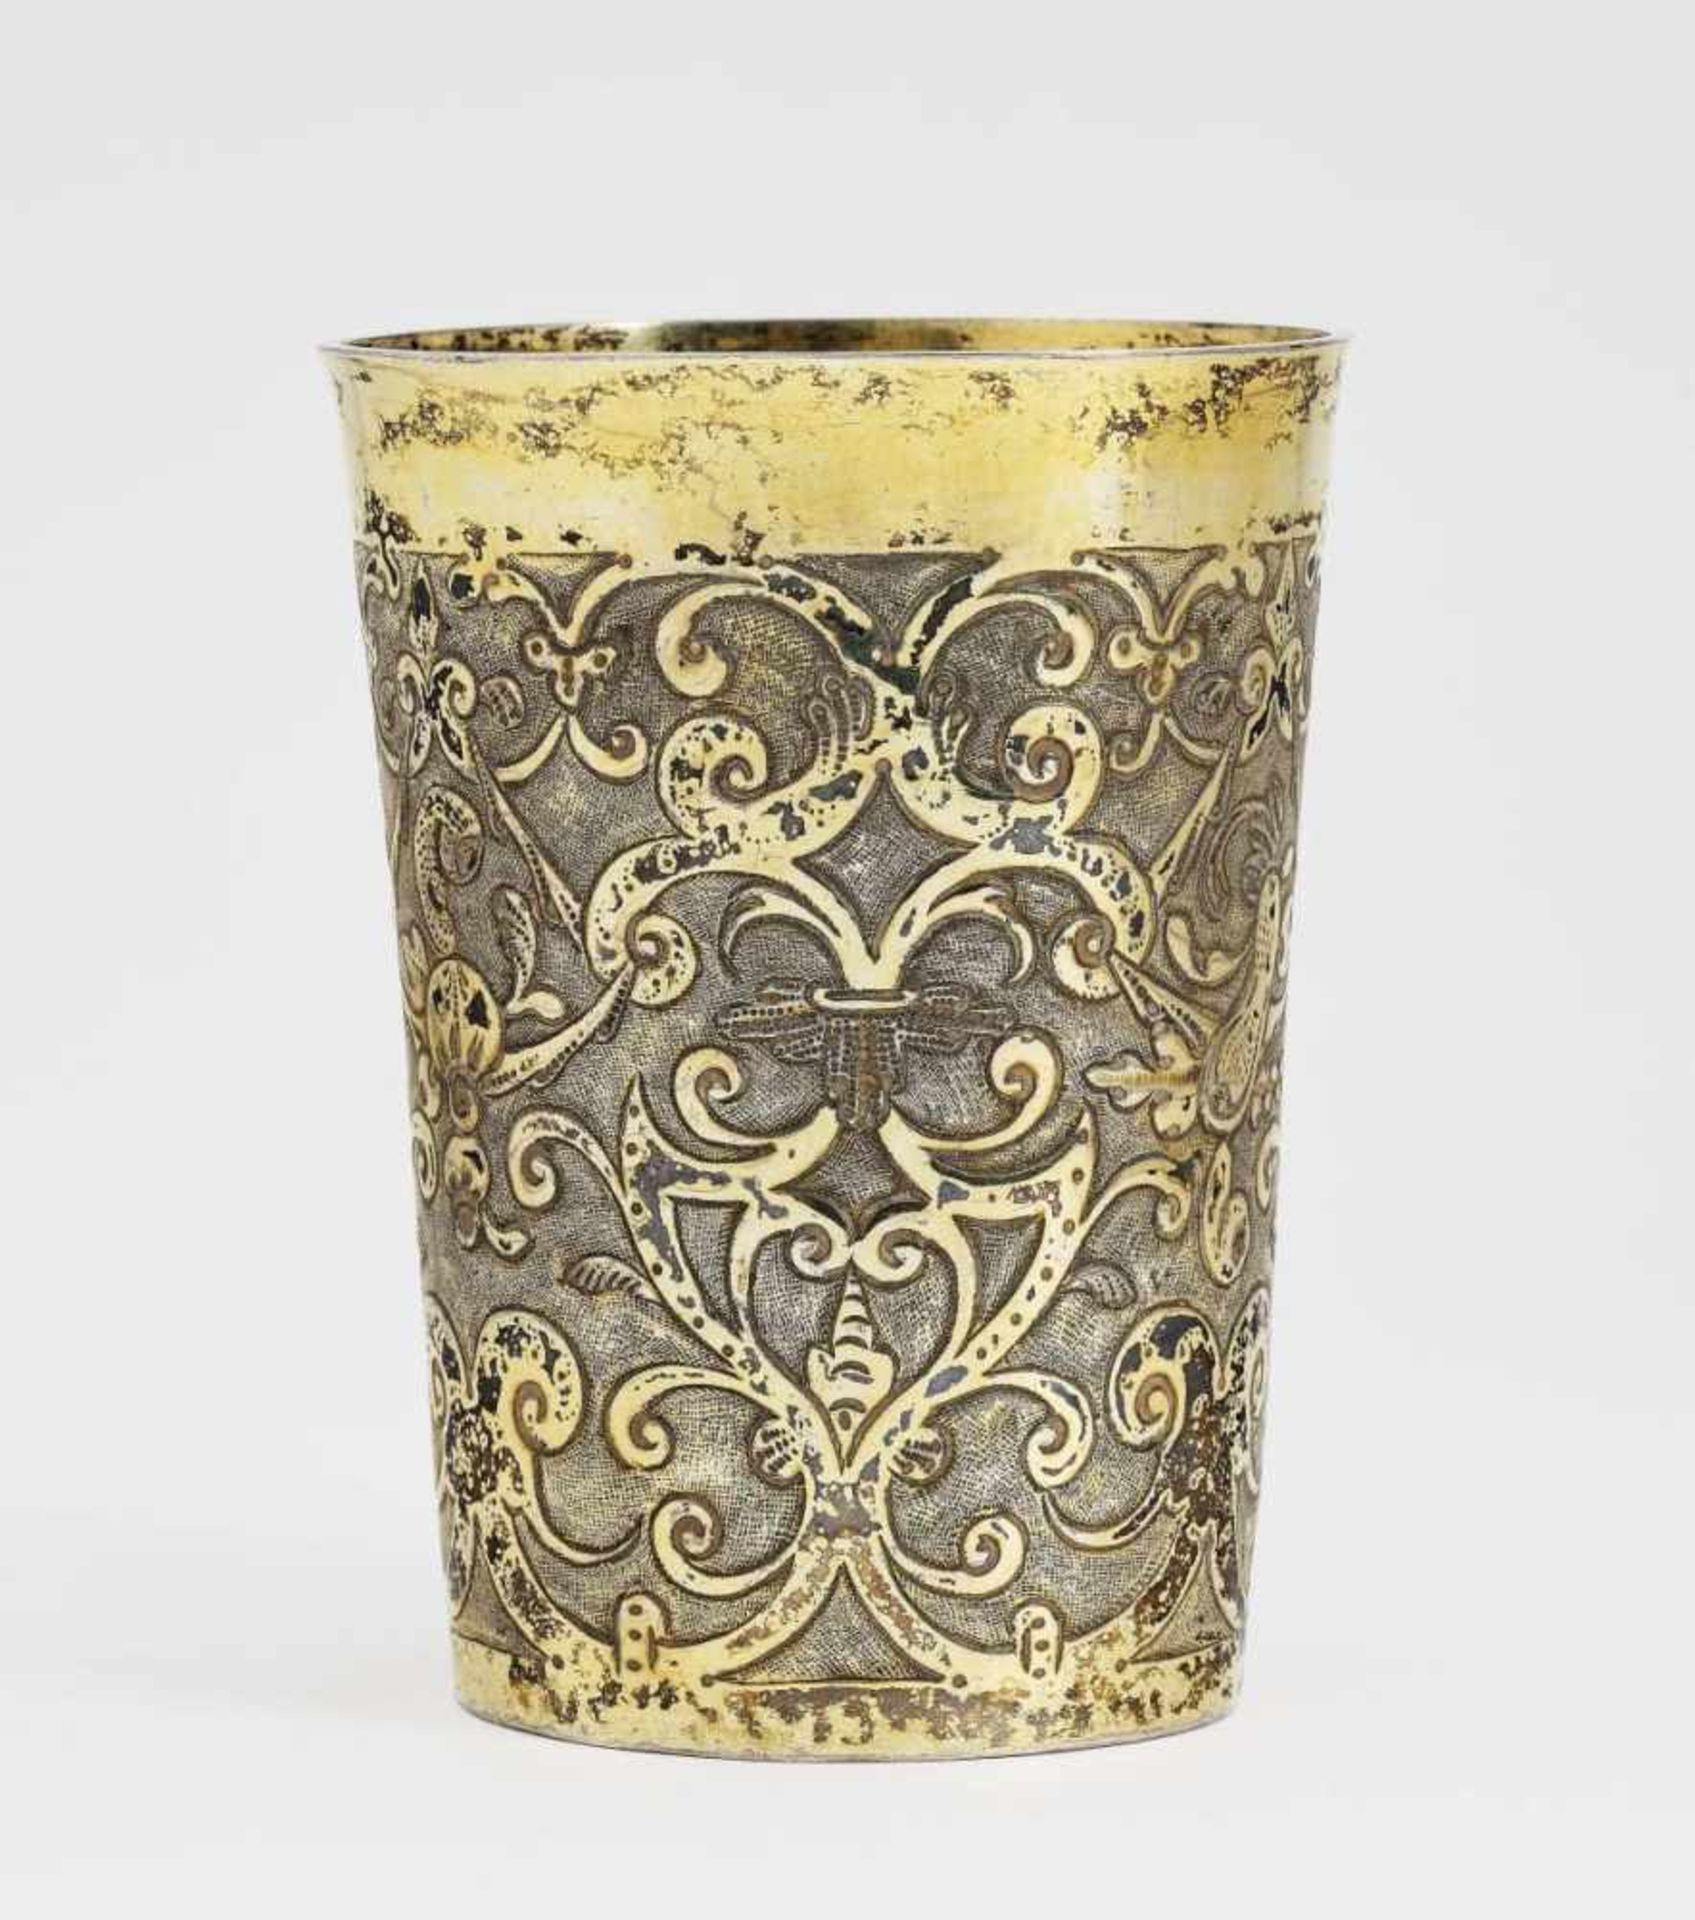 A Silver BeakerAugsburg, 1606 - 1610, Hans Bair Silver, gold-plated. Tapering cylindrical form.